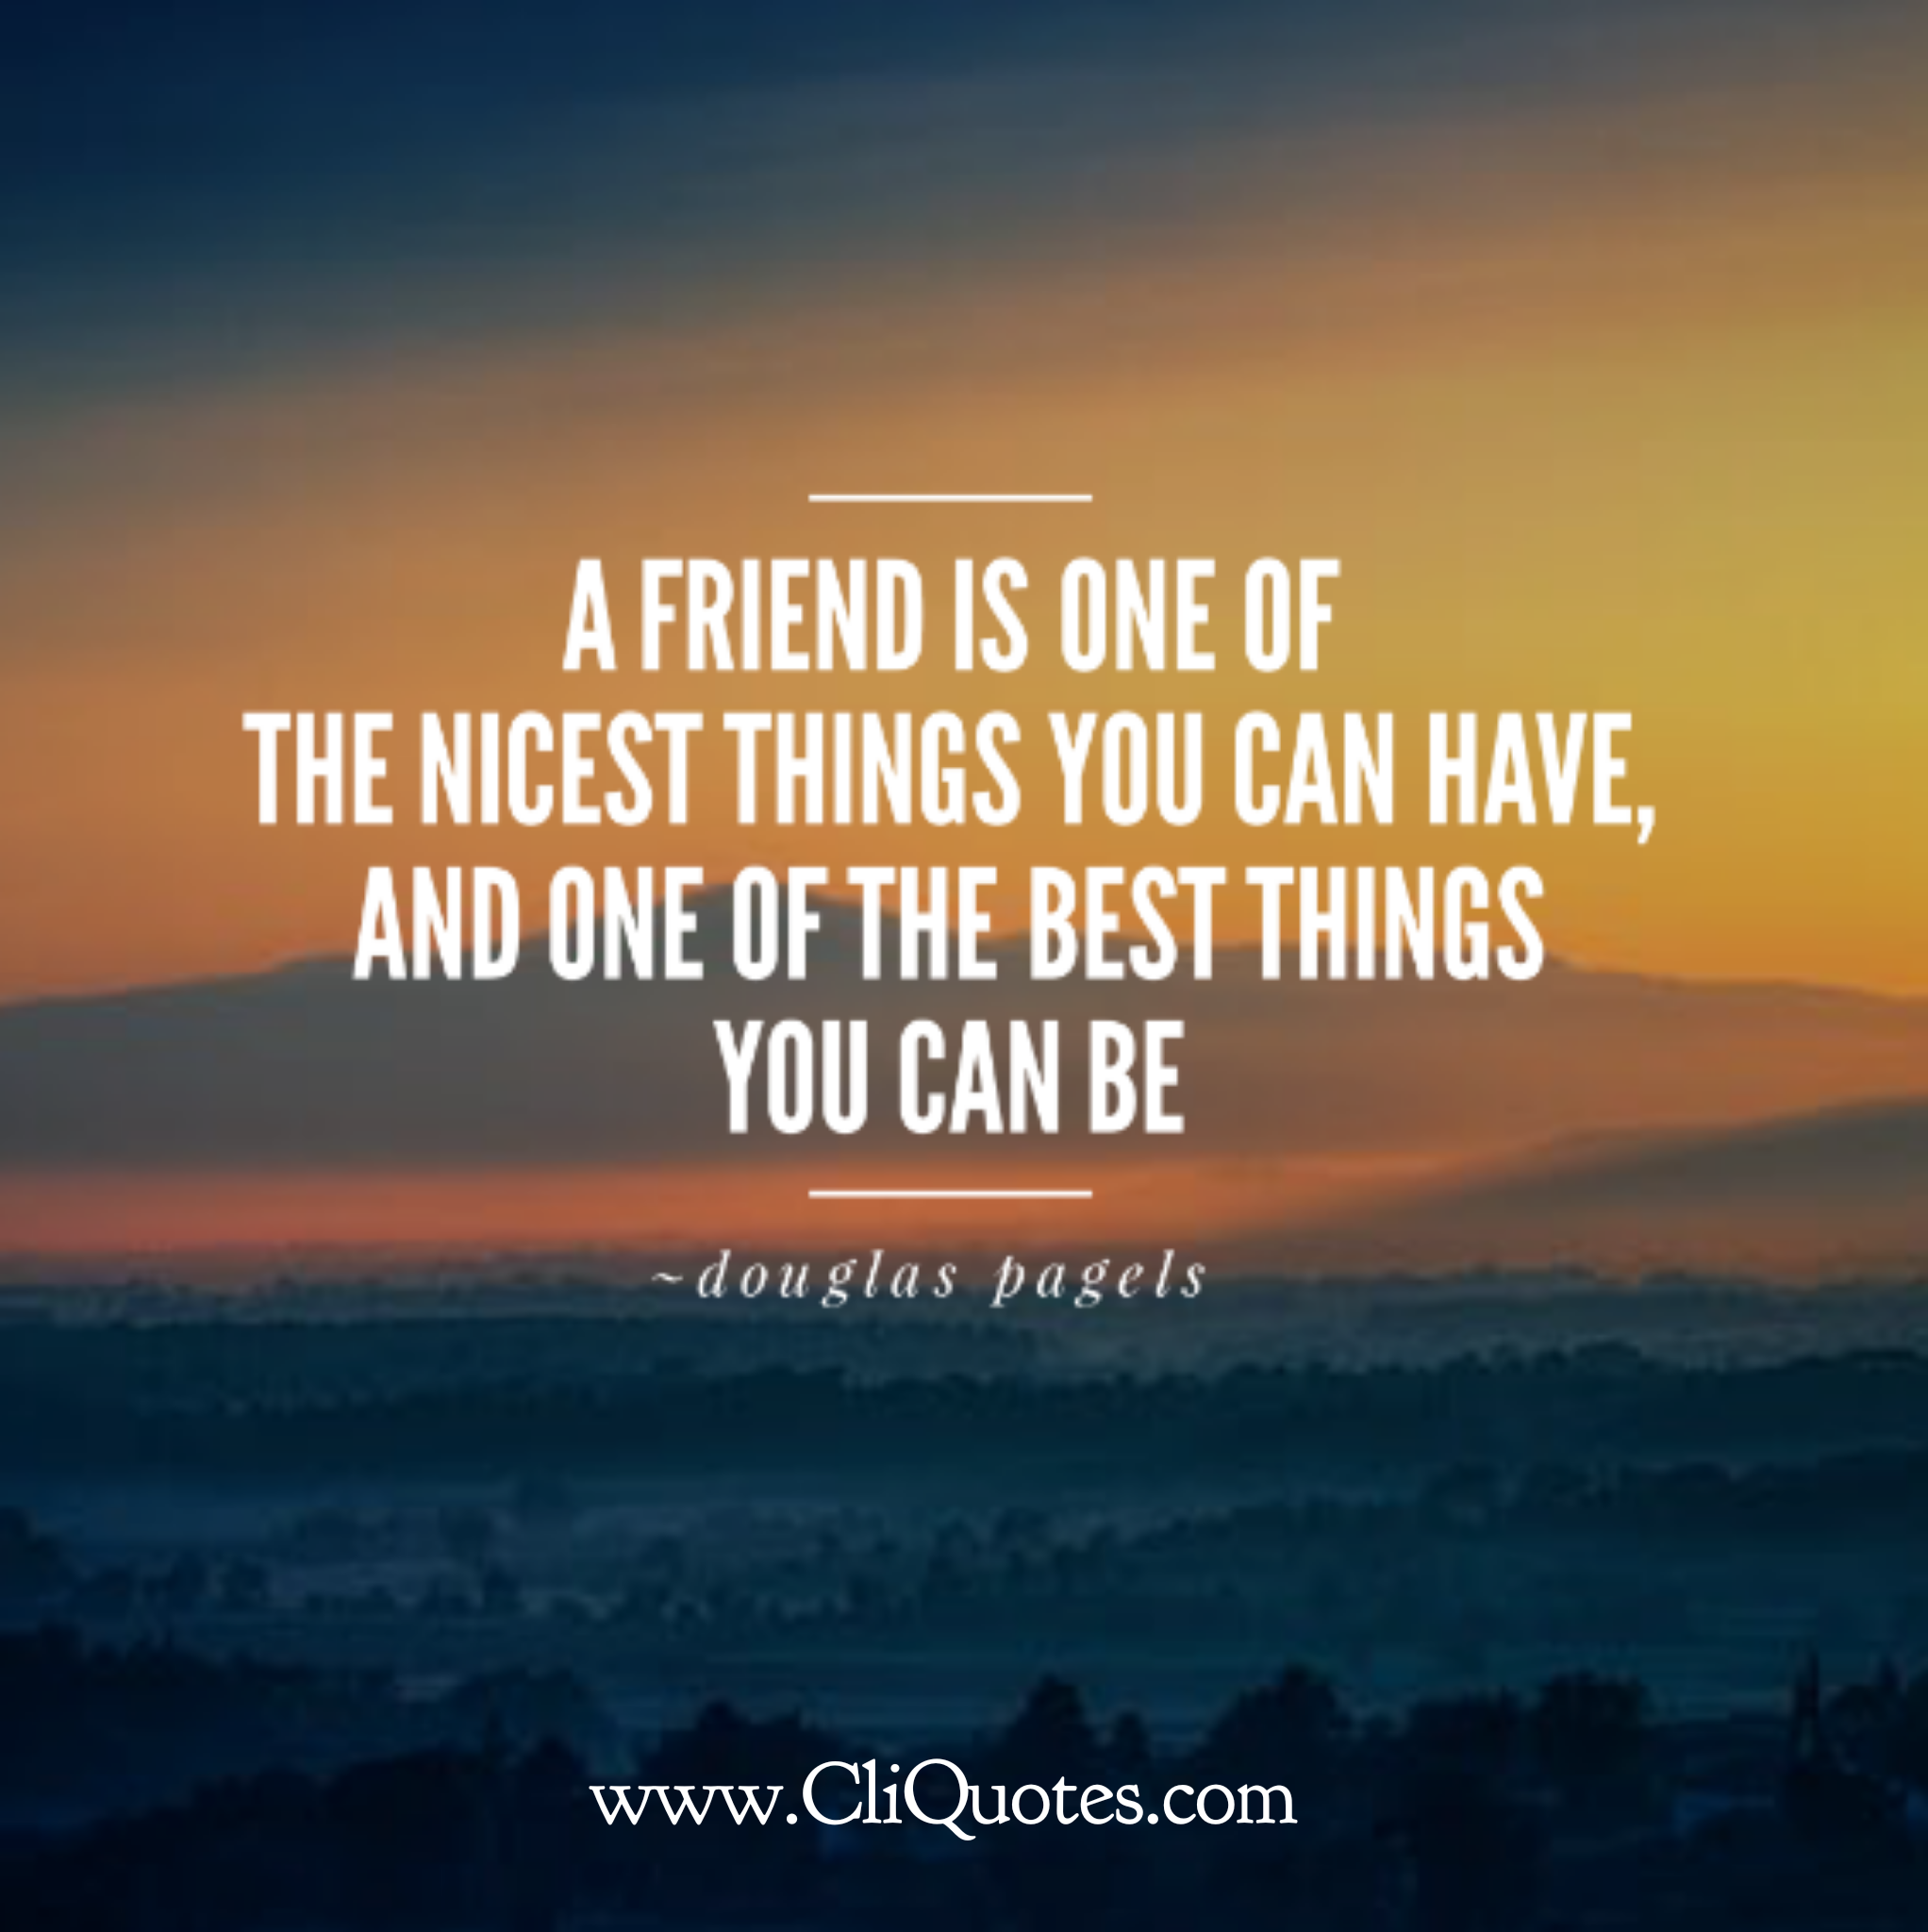 friendship quotes wallpaper Archives